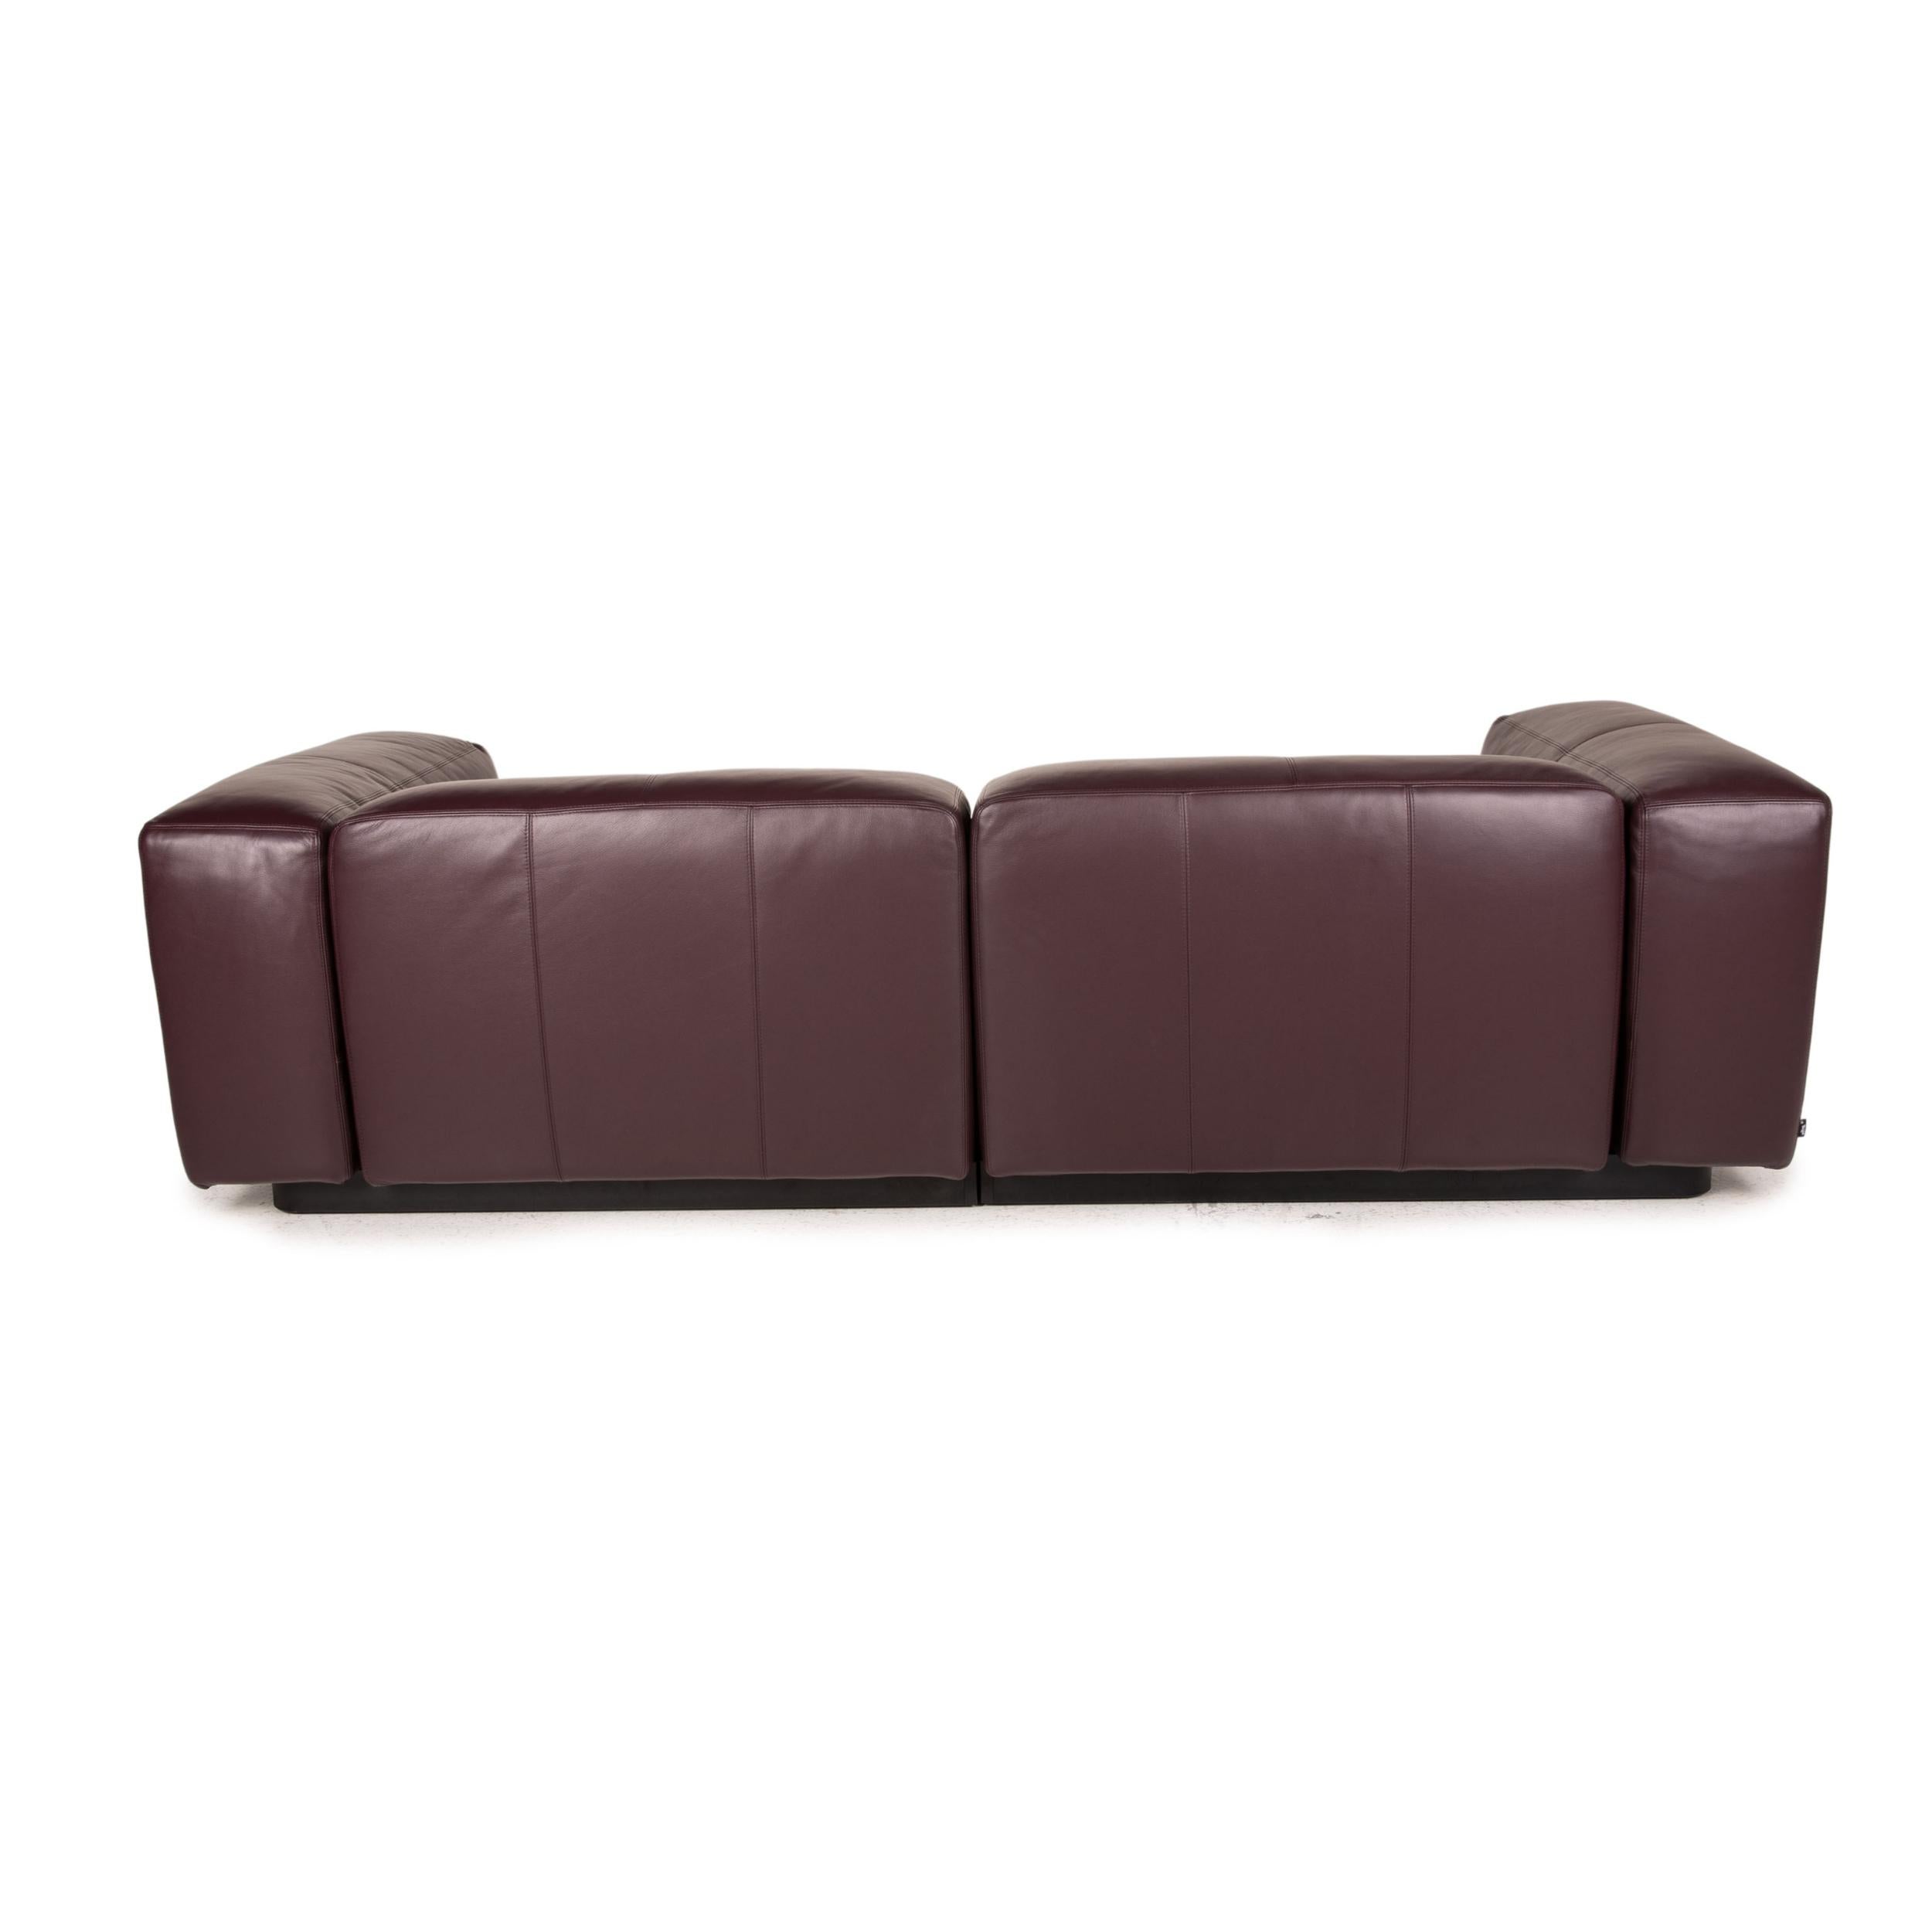 German Vitra Soft Modular Leather Sofa Purple Two-Seater Couch For Sale